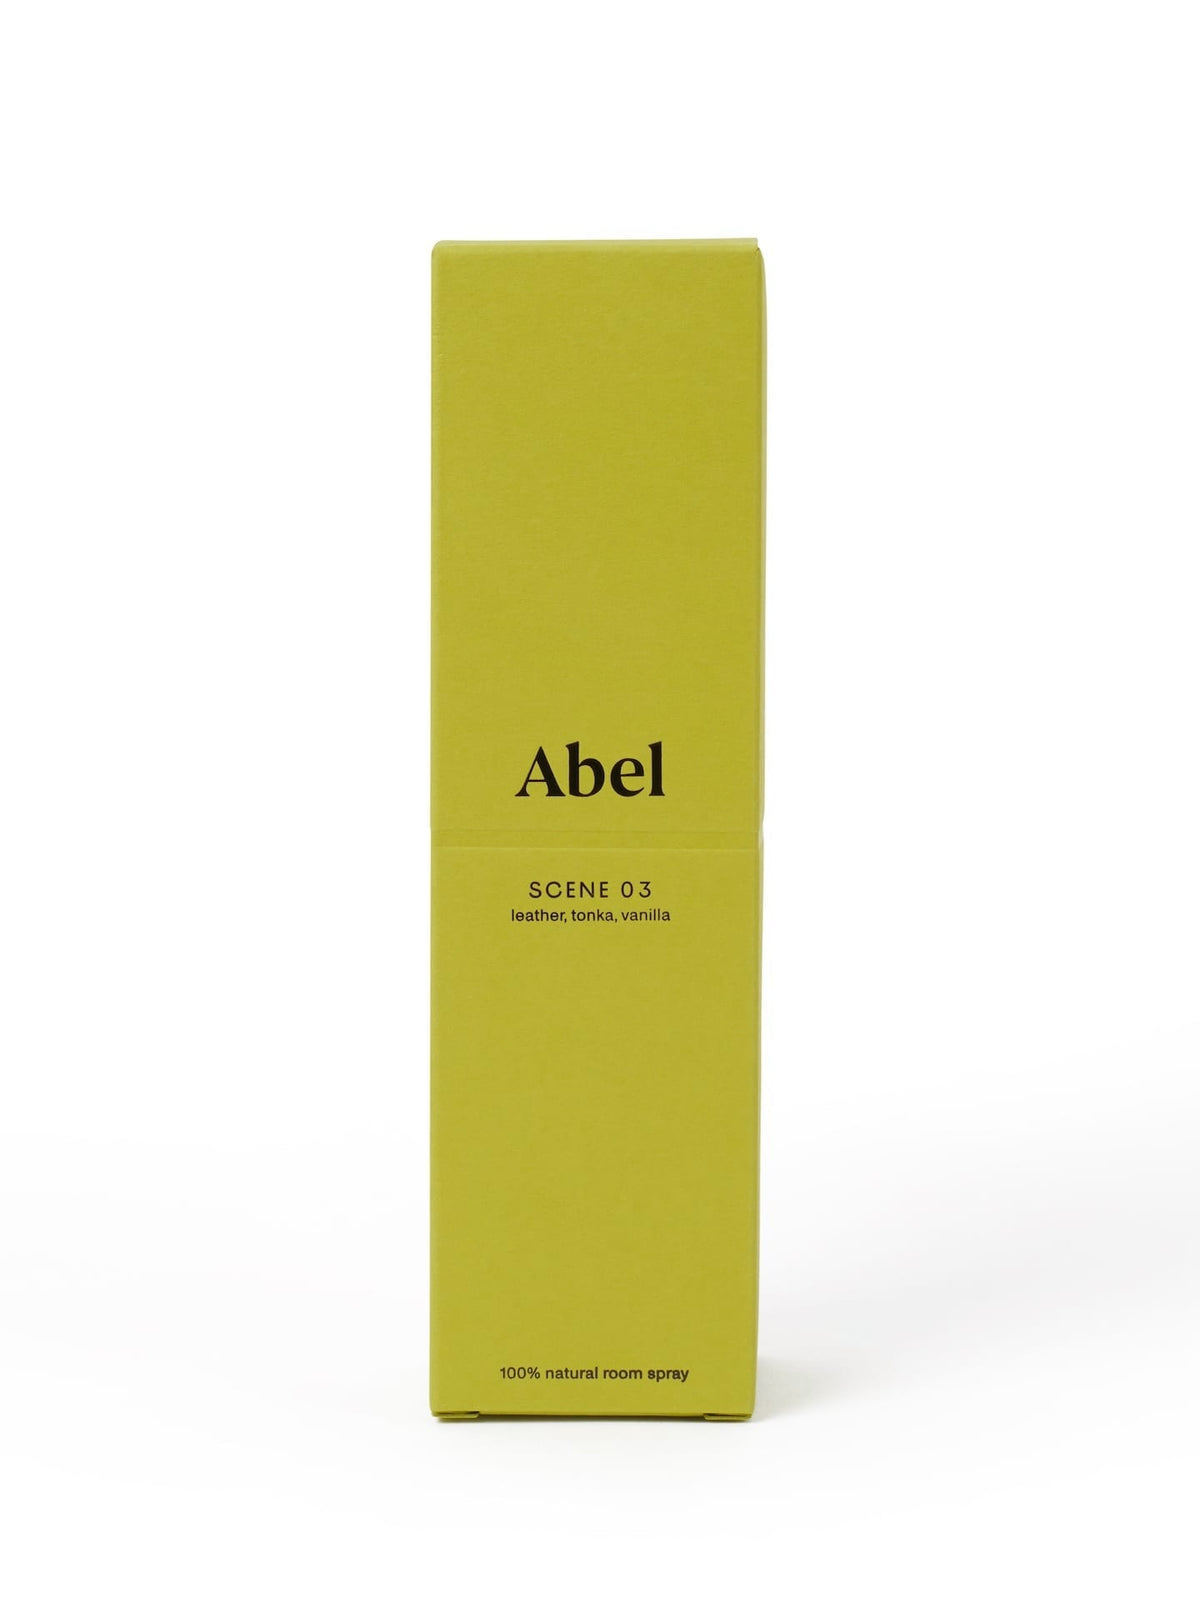 Yellow packaging for Abel brand natural Room Spray – Scene 03 with scent notes of leather, tonka, and vanilla, formulated with elevated scent ritual in mind.